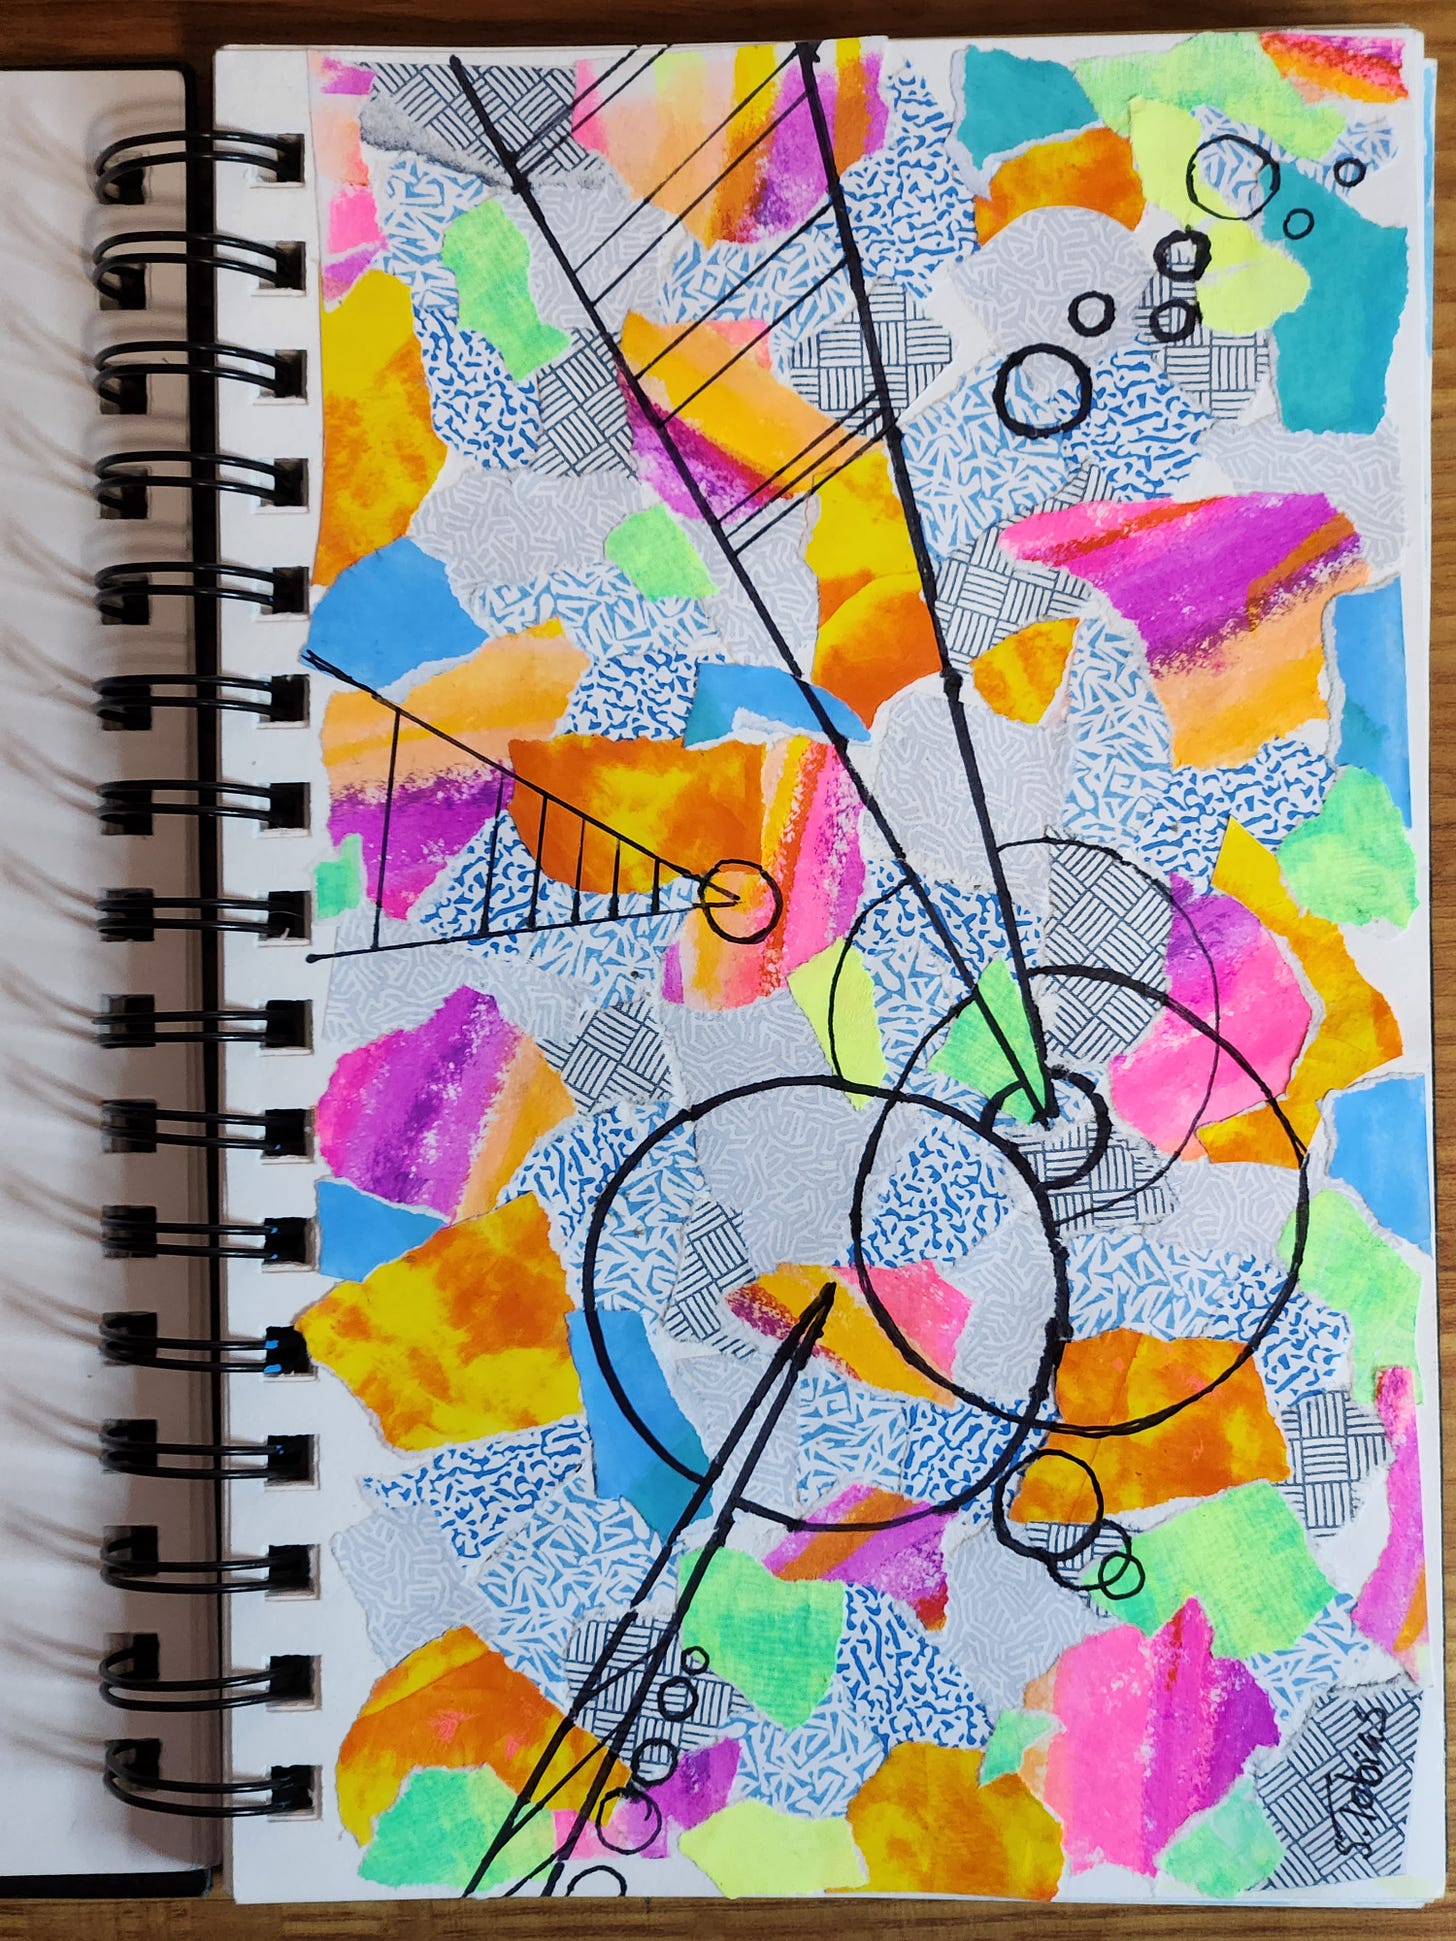 colorful torn paper collage with lines and circles randomly placed.